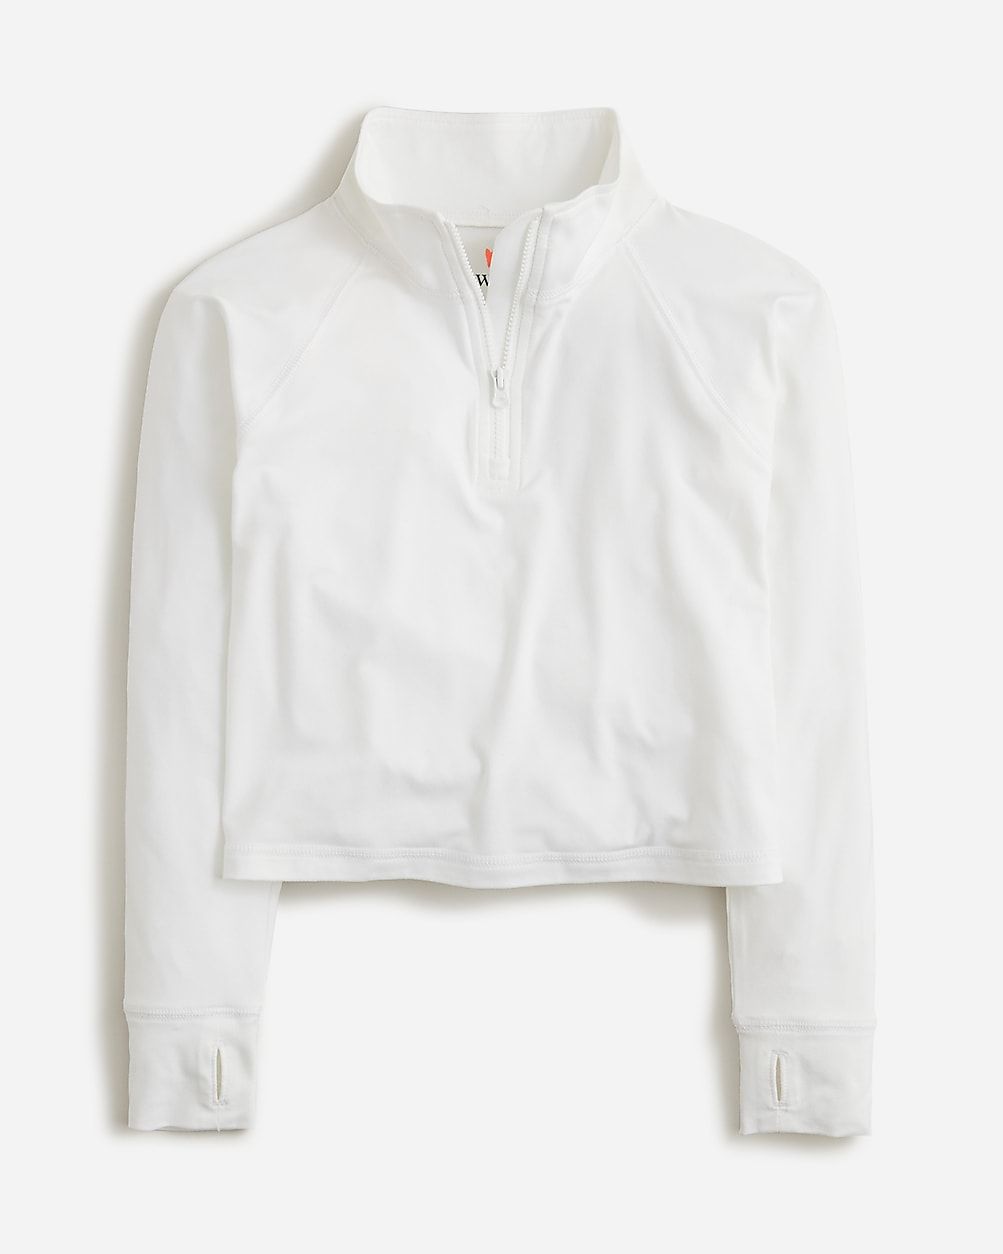 How to wear itGirls' active half-zip pullover$26.50$55.00 (52% Off)Limited time. Price as marked.... | J.Crew US